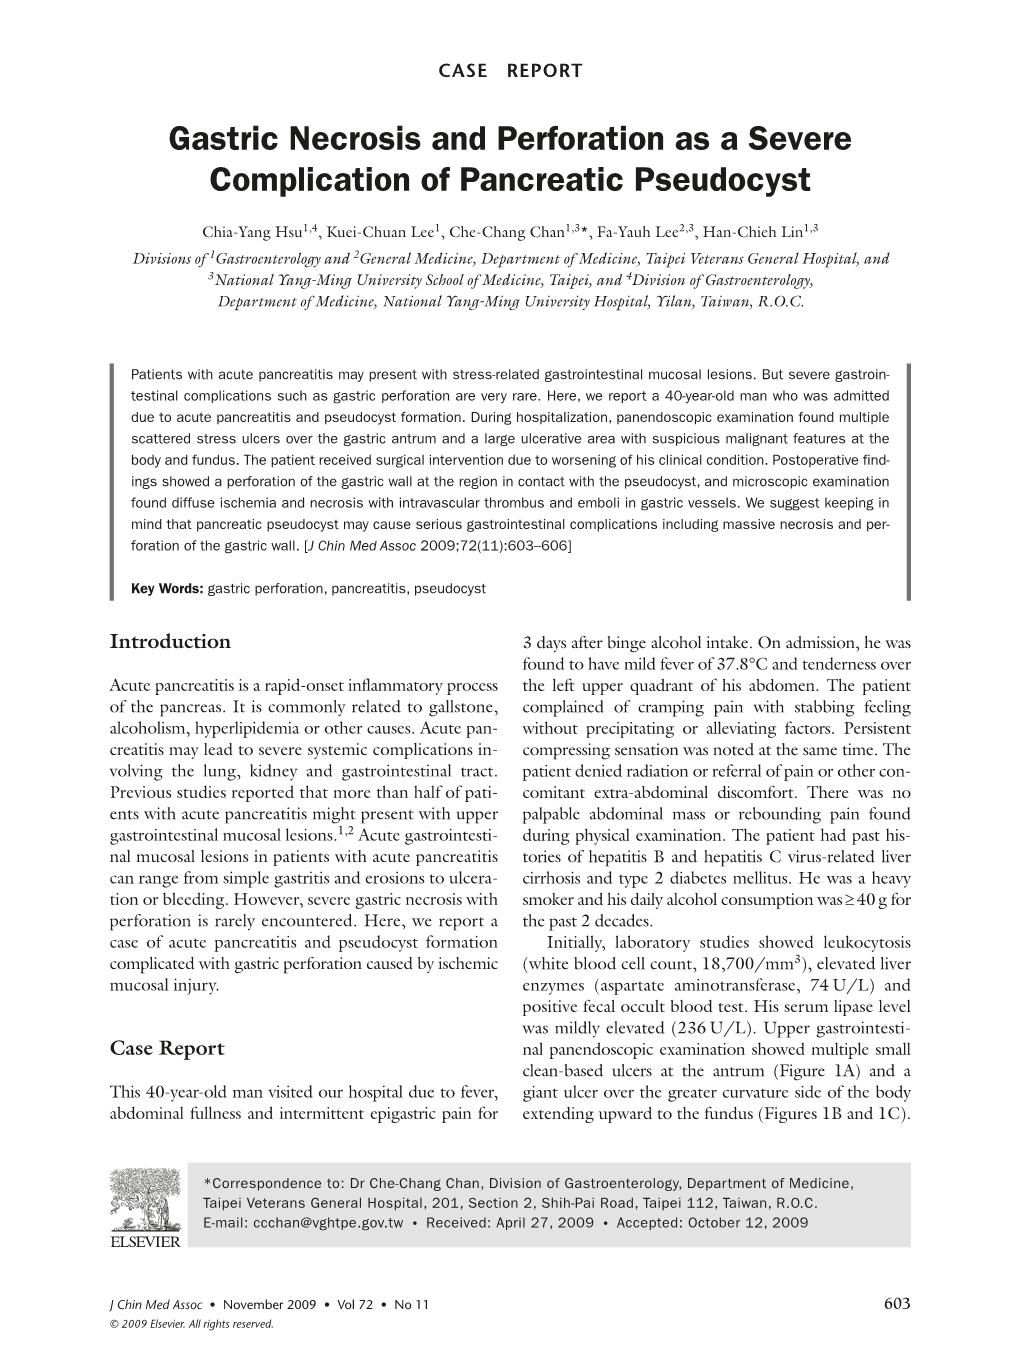 Gastric Necrosis and Perforation As a Severe Complication of Pancreatic Pseudocyst